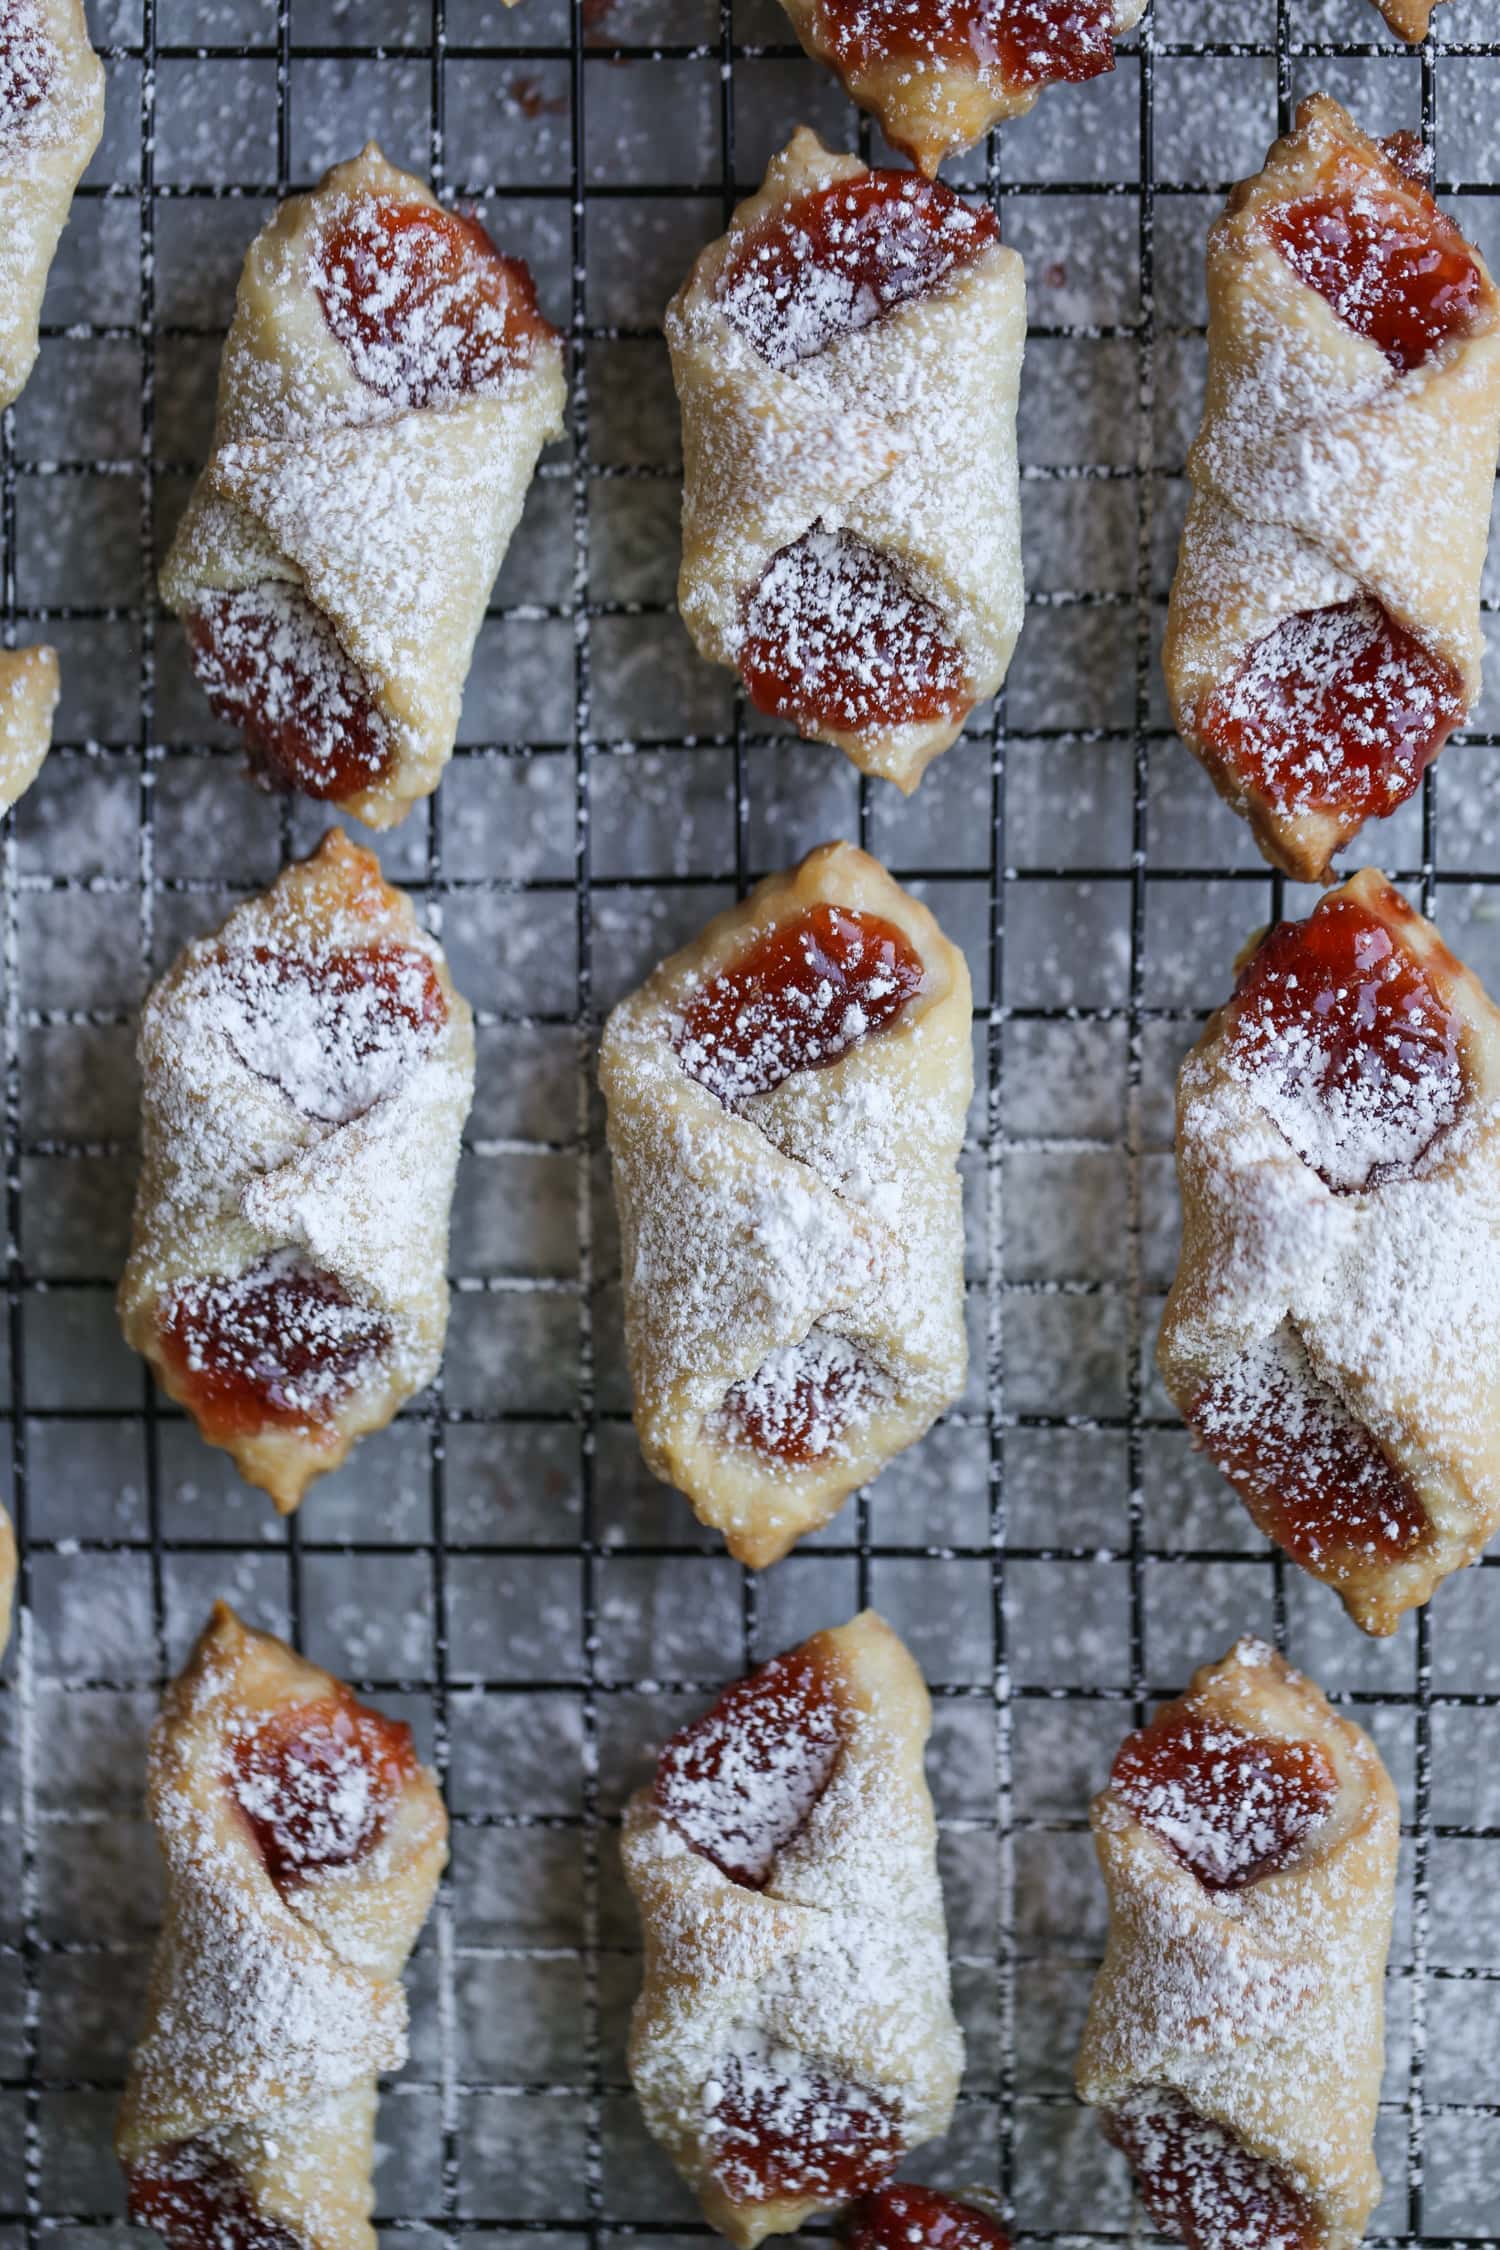 Filled and baked polish kolaczki cookies arranged in rows on a baking sheet, dusted with powdered sugar.